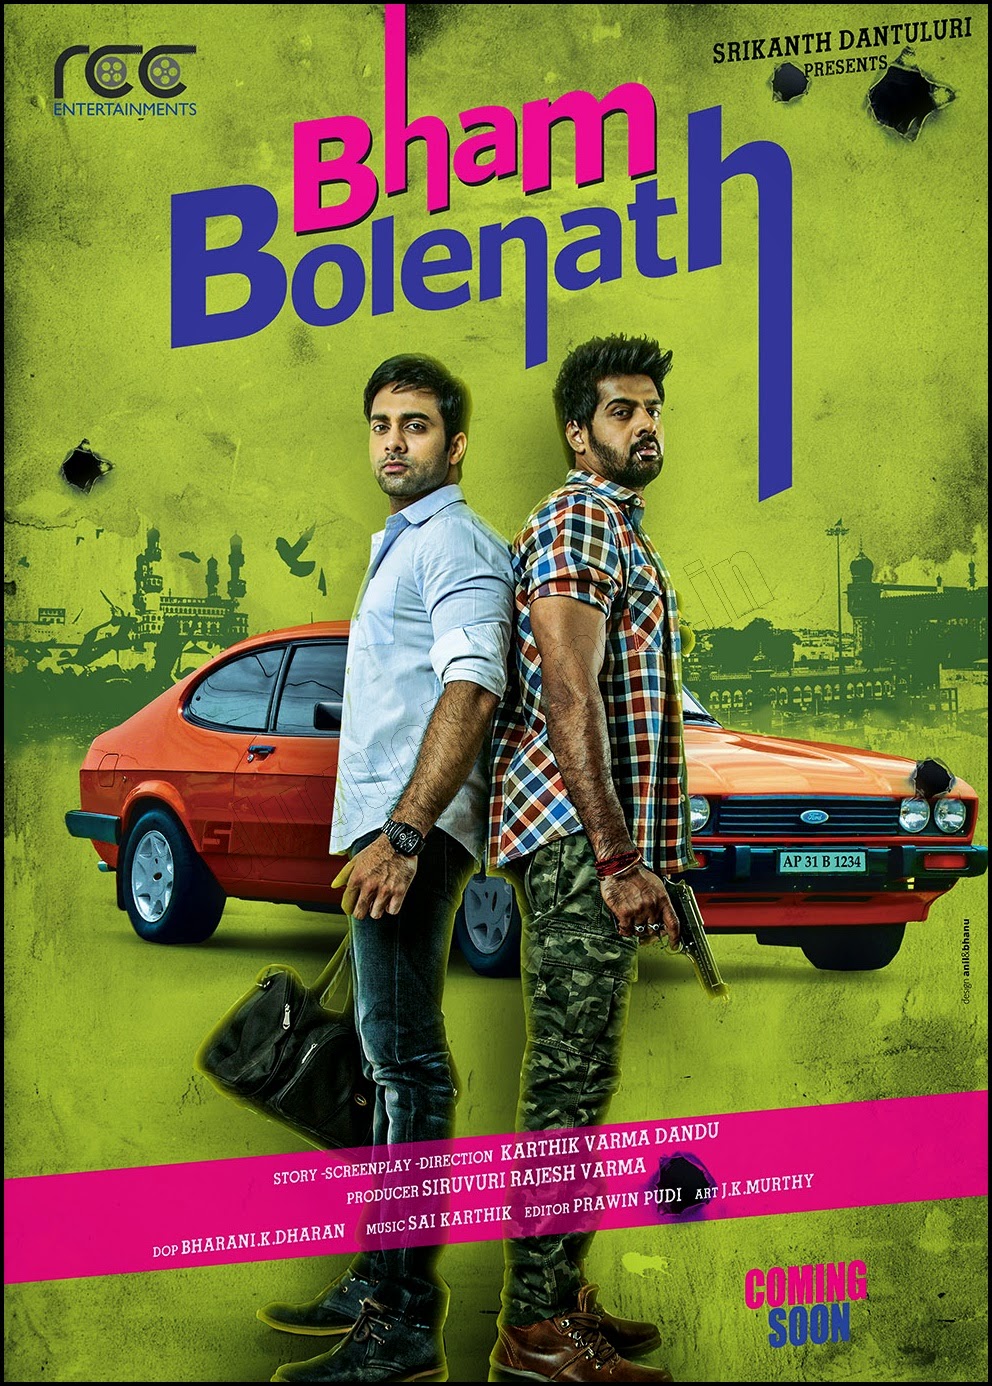  'bham bolenath' in  Kannada  Navdeep, naveen chandra,Pradeep  played the lead roles  in'bham bolenath'.  The film produced under the banner of R AC entartainments siruvuri rajesvarma Kartik Varma's directorial debut armament. The most recent release of the film feature a different image of the successful reception of the audience. Dandupalyam Kannada remake rights of the film, director, producer srinivasaraju was sivam images. He will soon cast in a remake of the popular Kannada film. This film reveals more details soon.